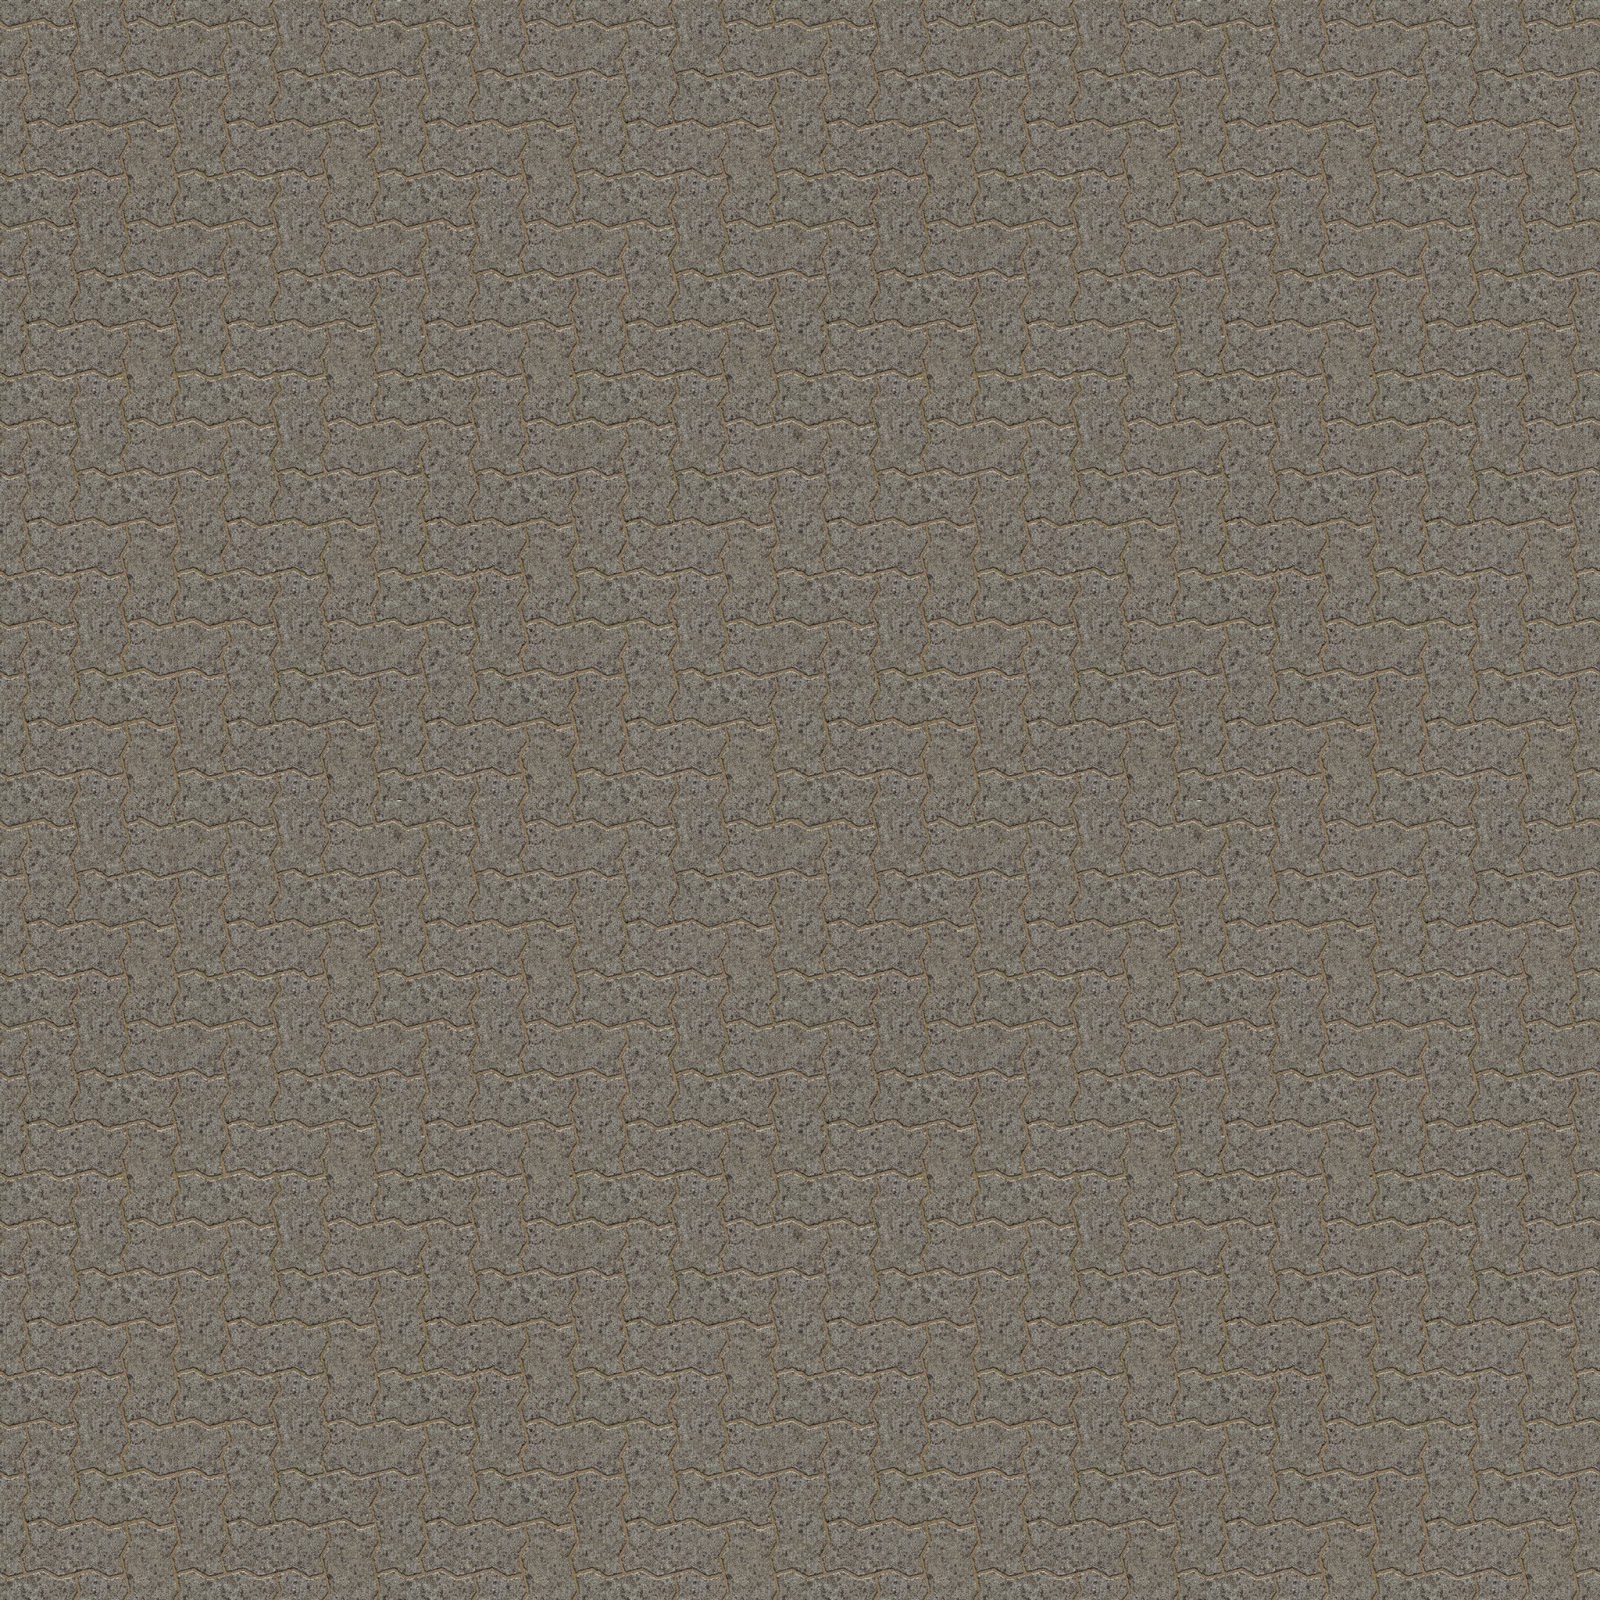 Tiling preview of the above texture